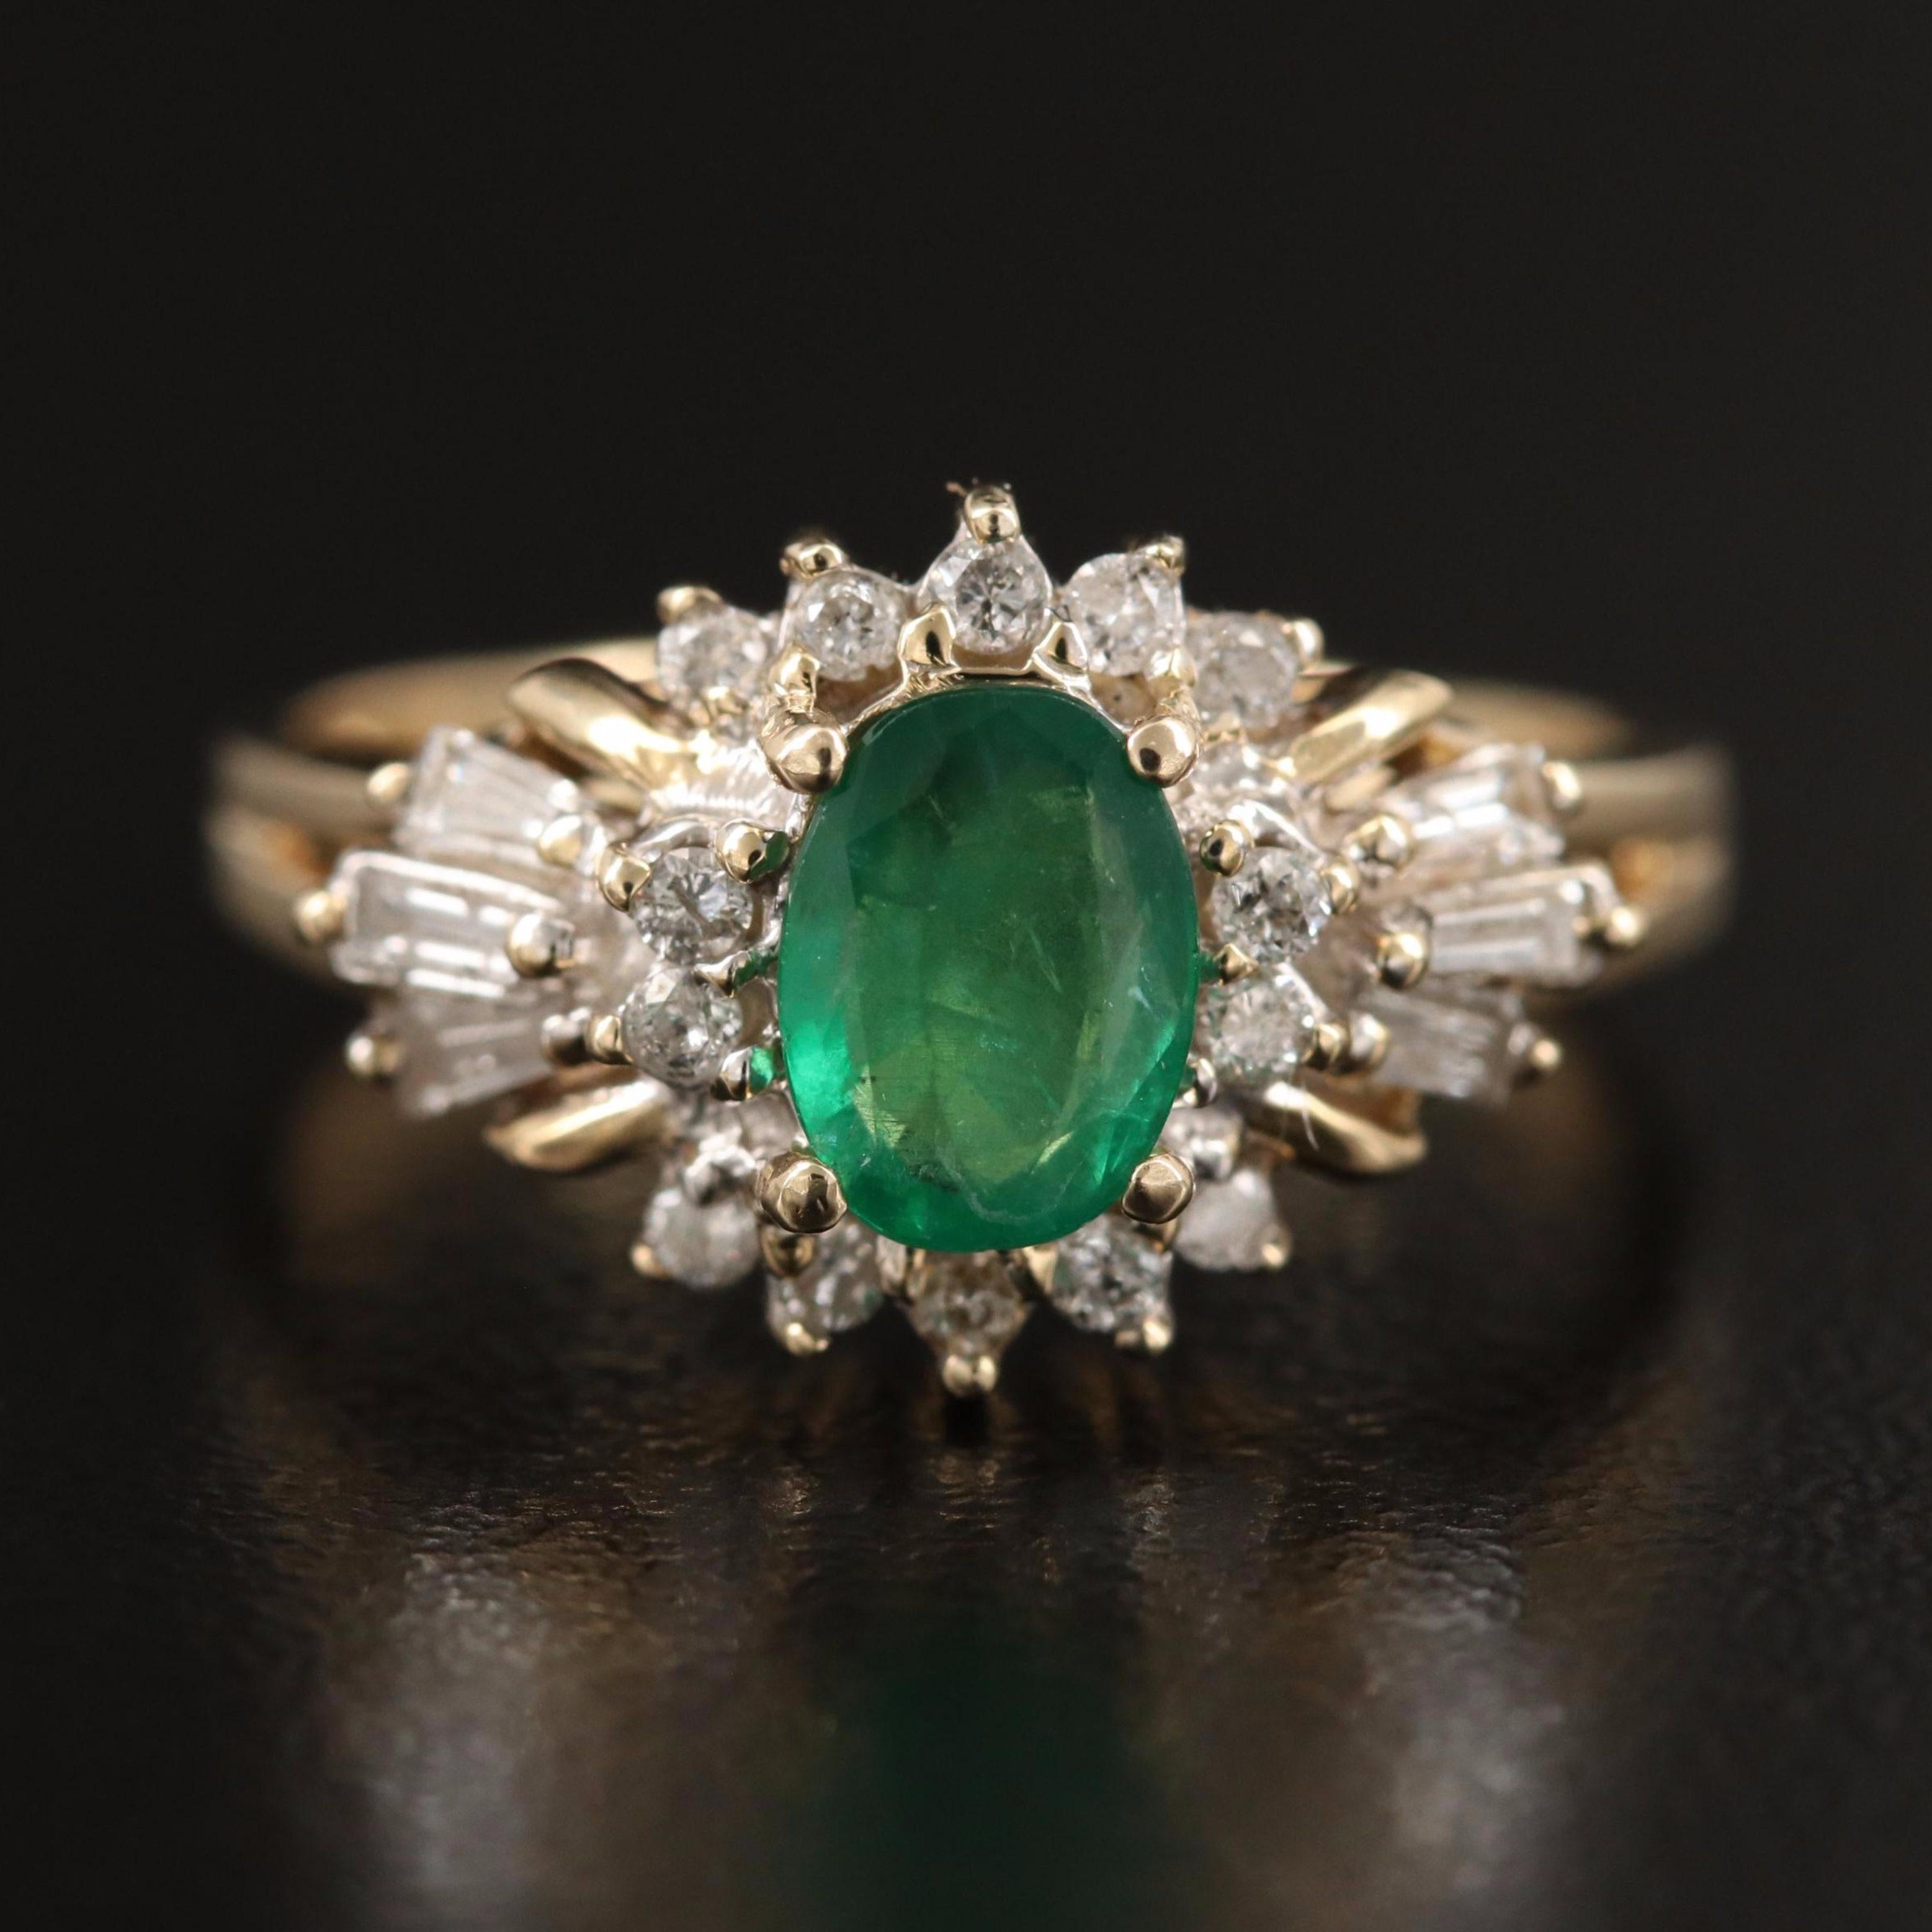 For Sale:  Oval Cut Natural Emerald Engagement Ring, Floral Emerald Diamond Wedding Ring  7